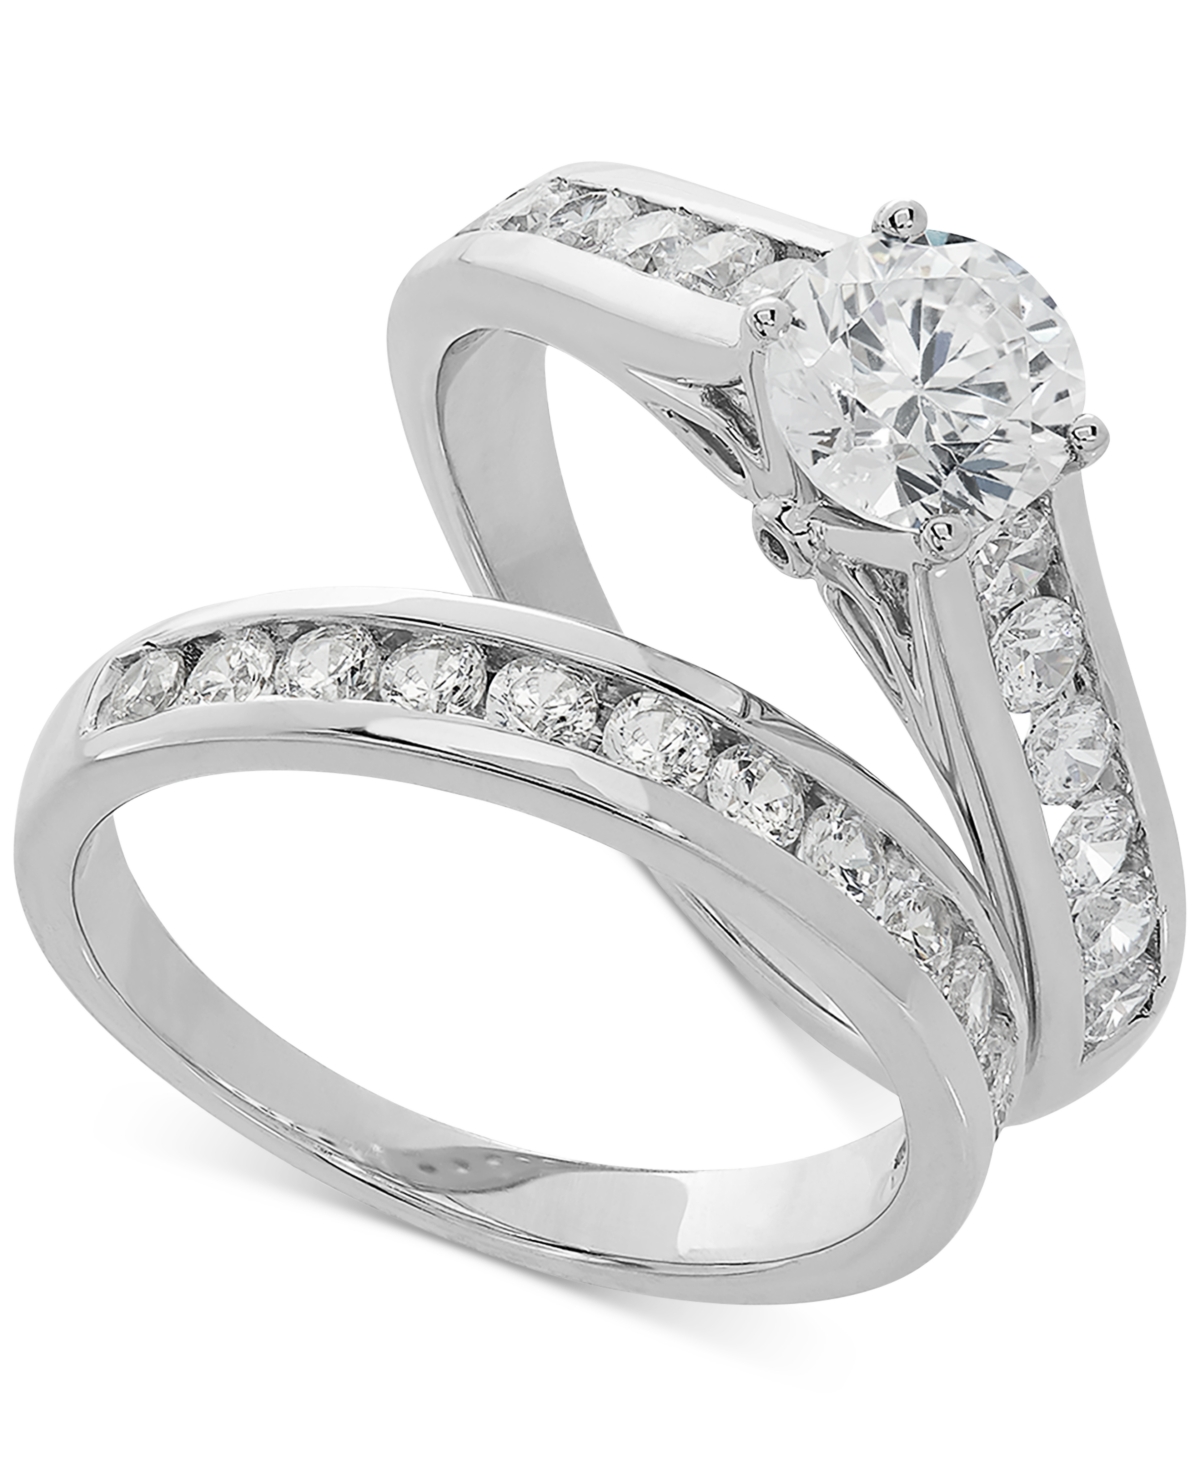 Grown With Love Igi Certified Lab Grown Diamond Channel-Set Bridal Set (2 ct. t.w.) in 14k White Gold